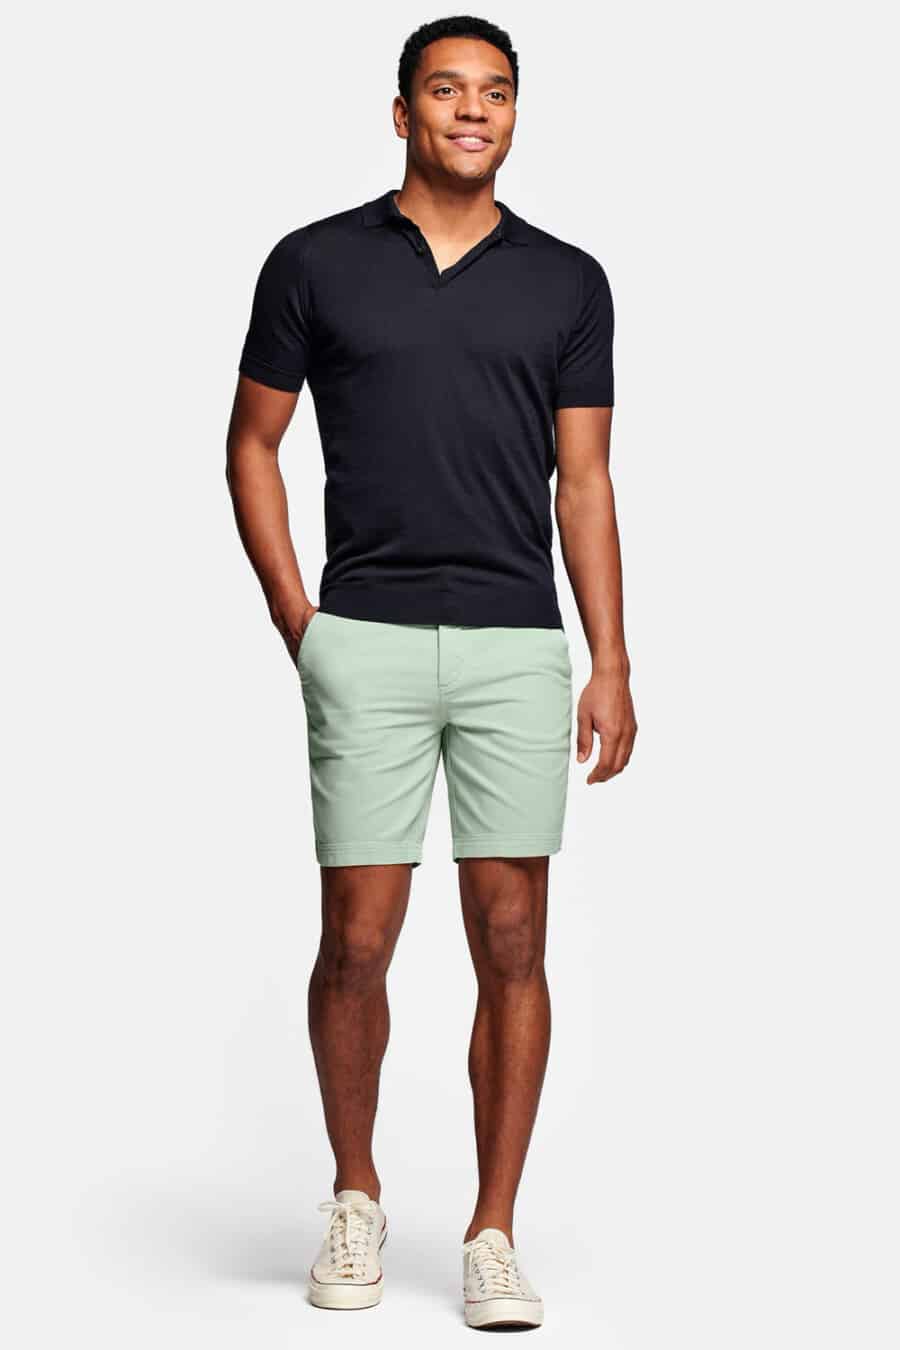 Men's Pastel green Bermuda shorts, navy polo shirt and off-white canvas sneakers outfit